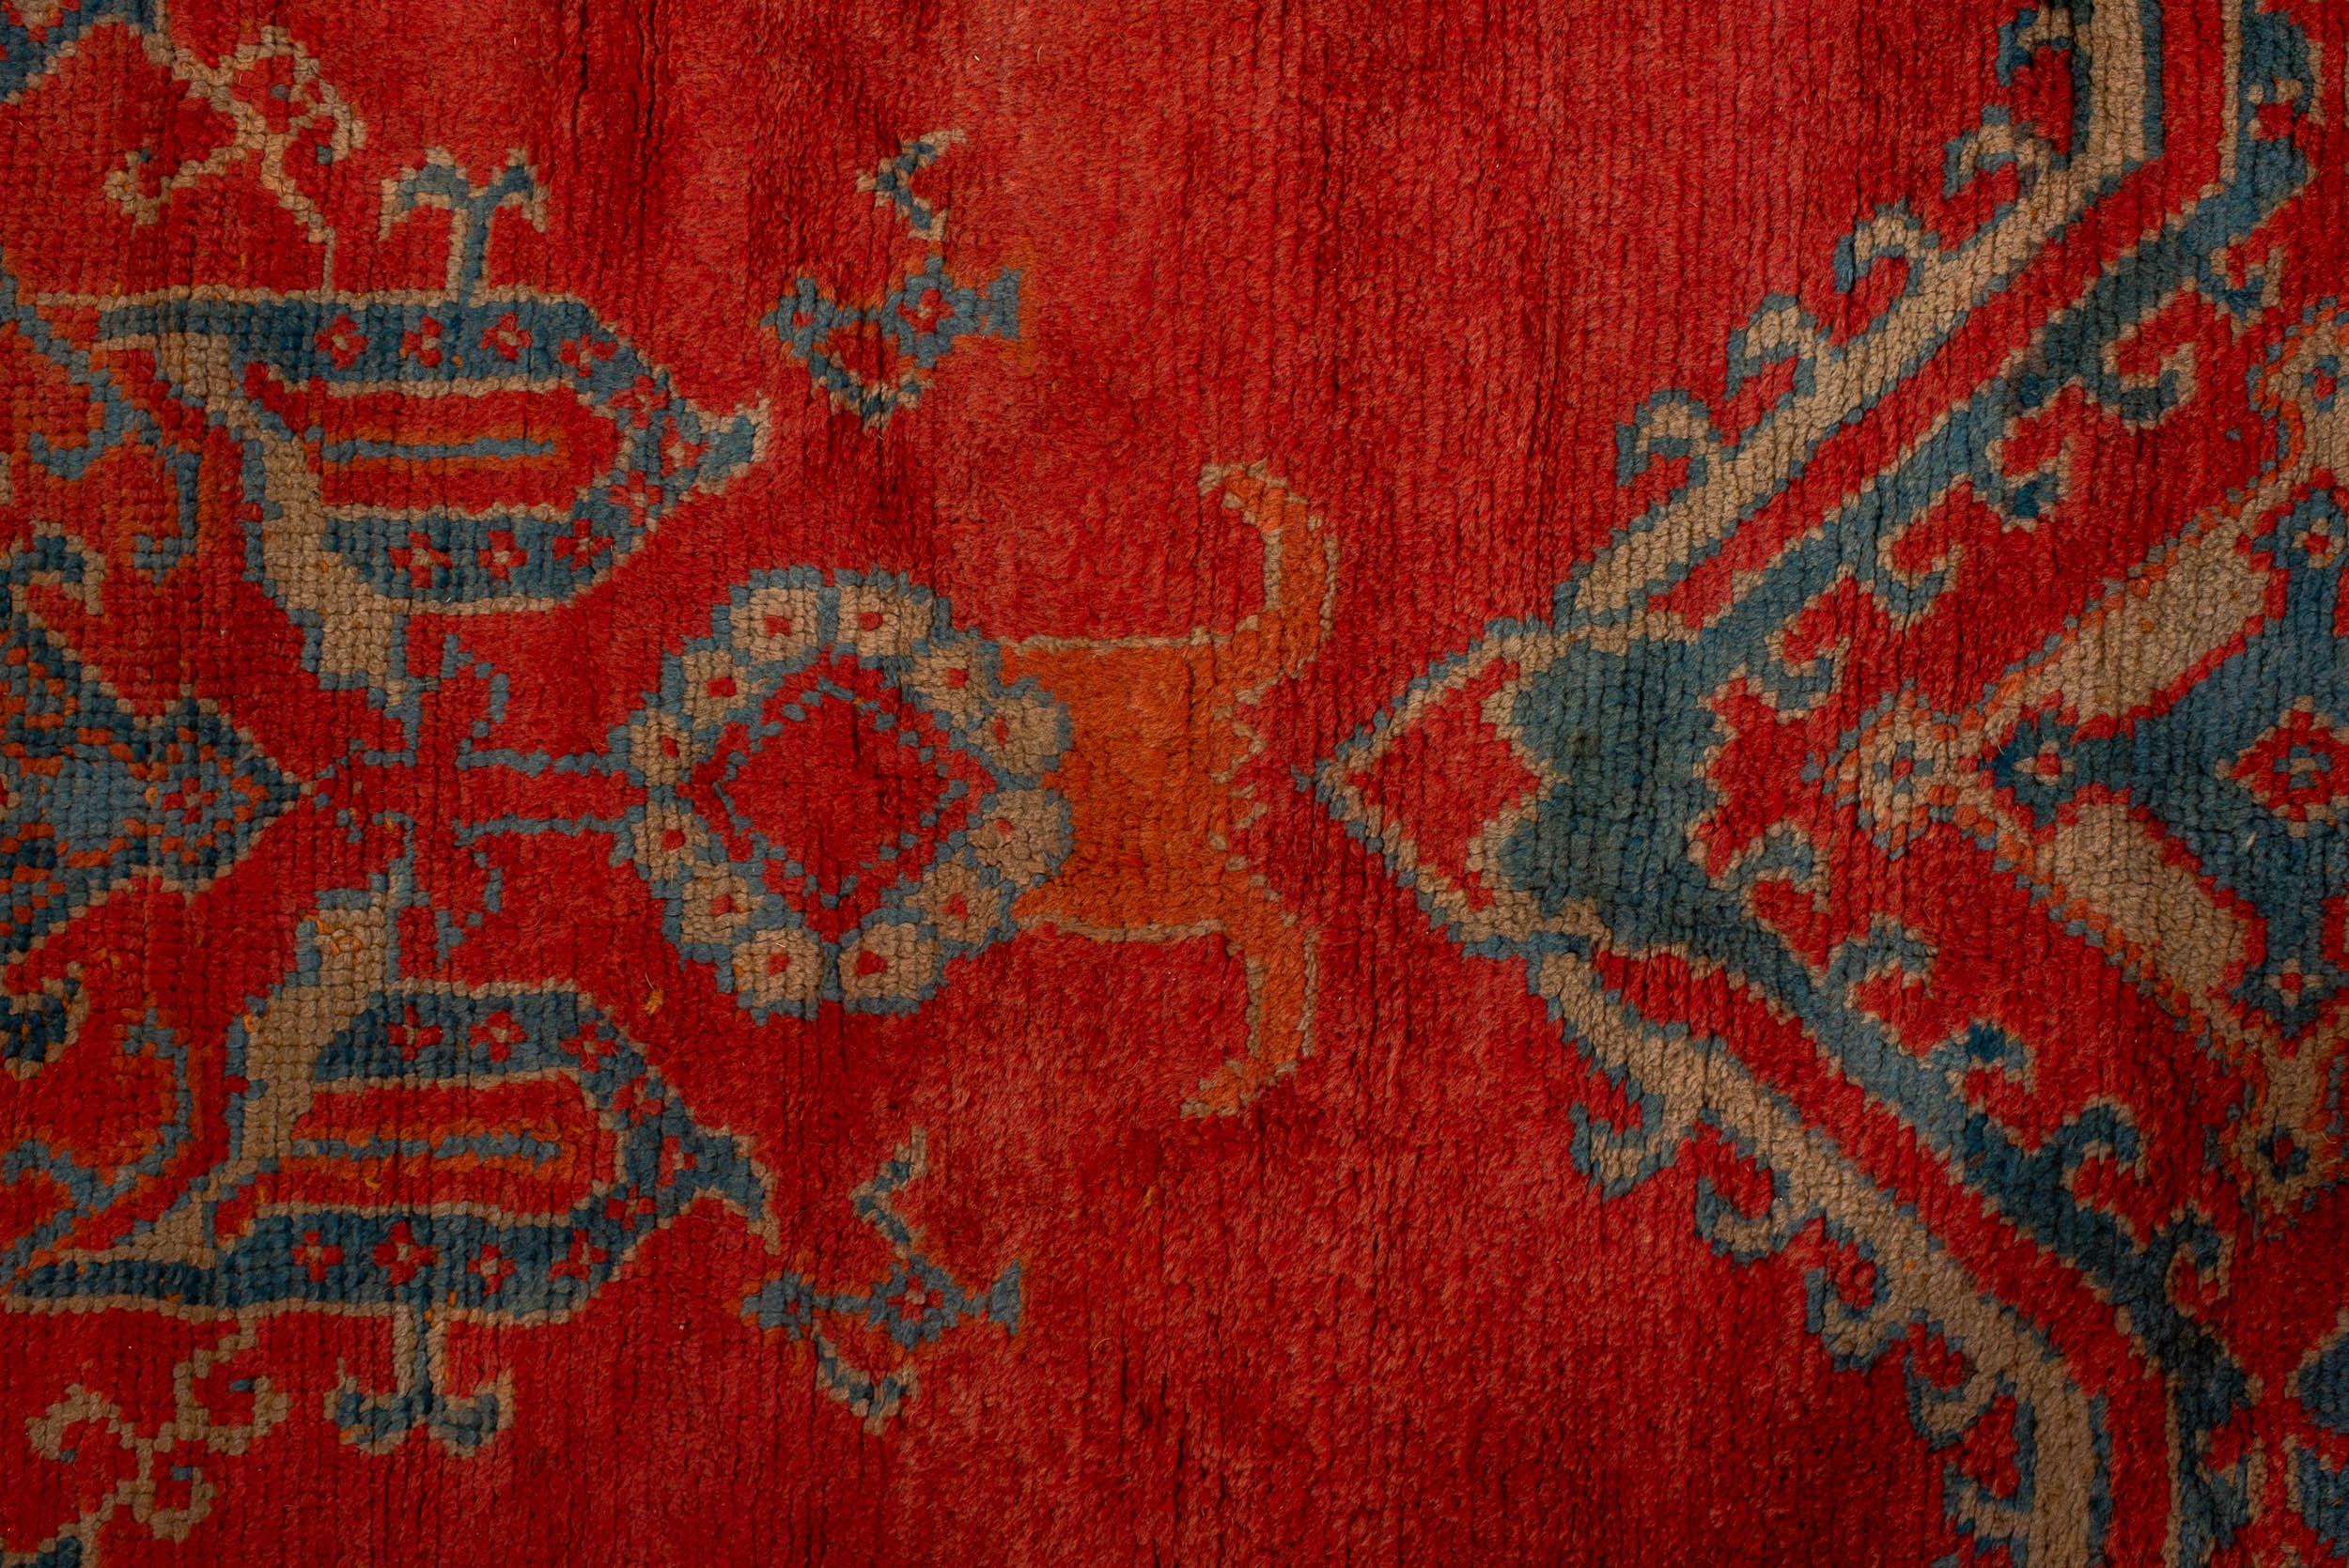 The Antique Turkish Oushak rug is a handwoven piece that holds historical and cultural significance. Oushak rugs, also known as Ushak rugs, originated in the city of Oushak in western Turkey. They are renowned for their intricate designs, vibrant